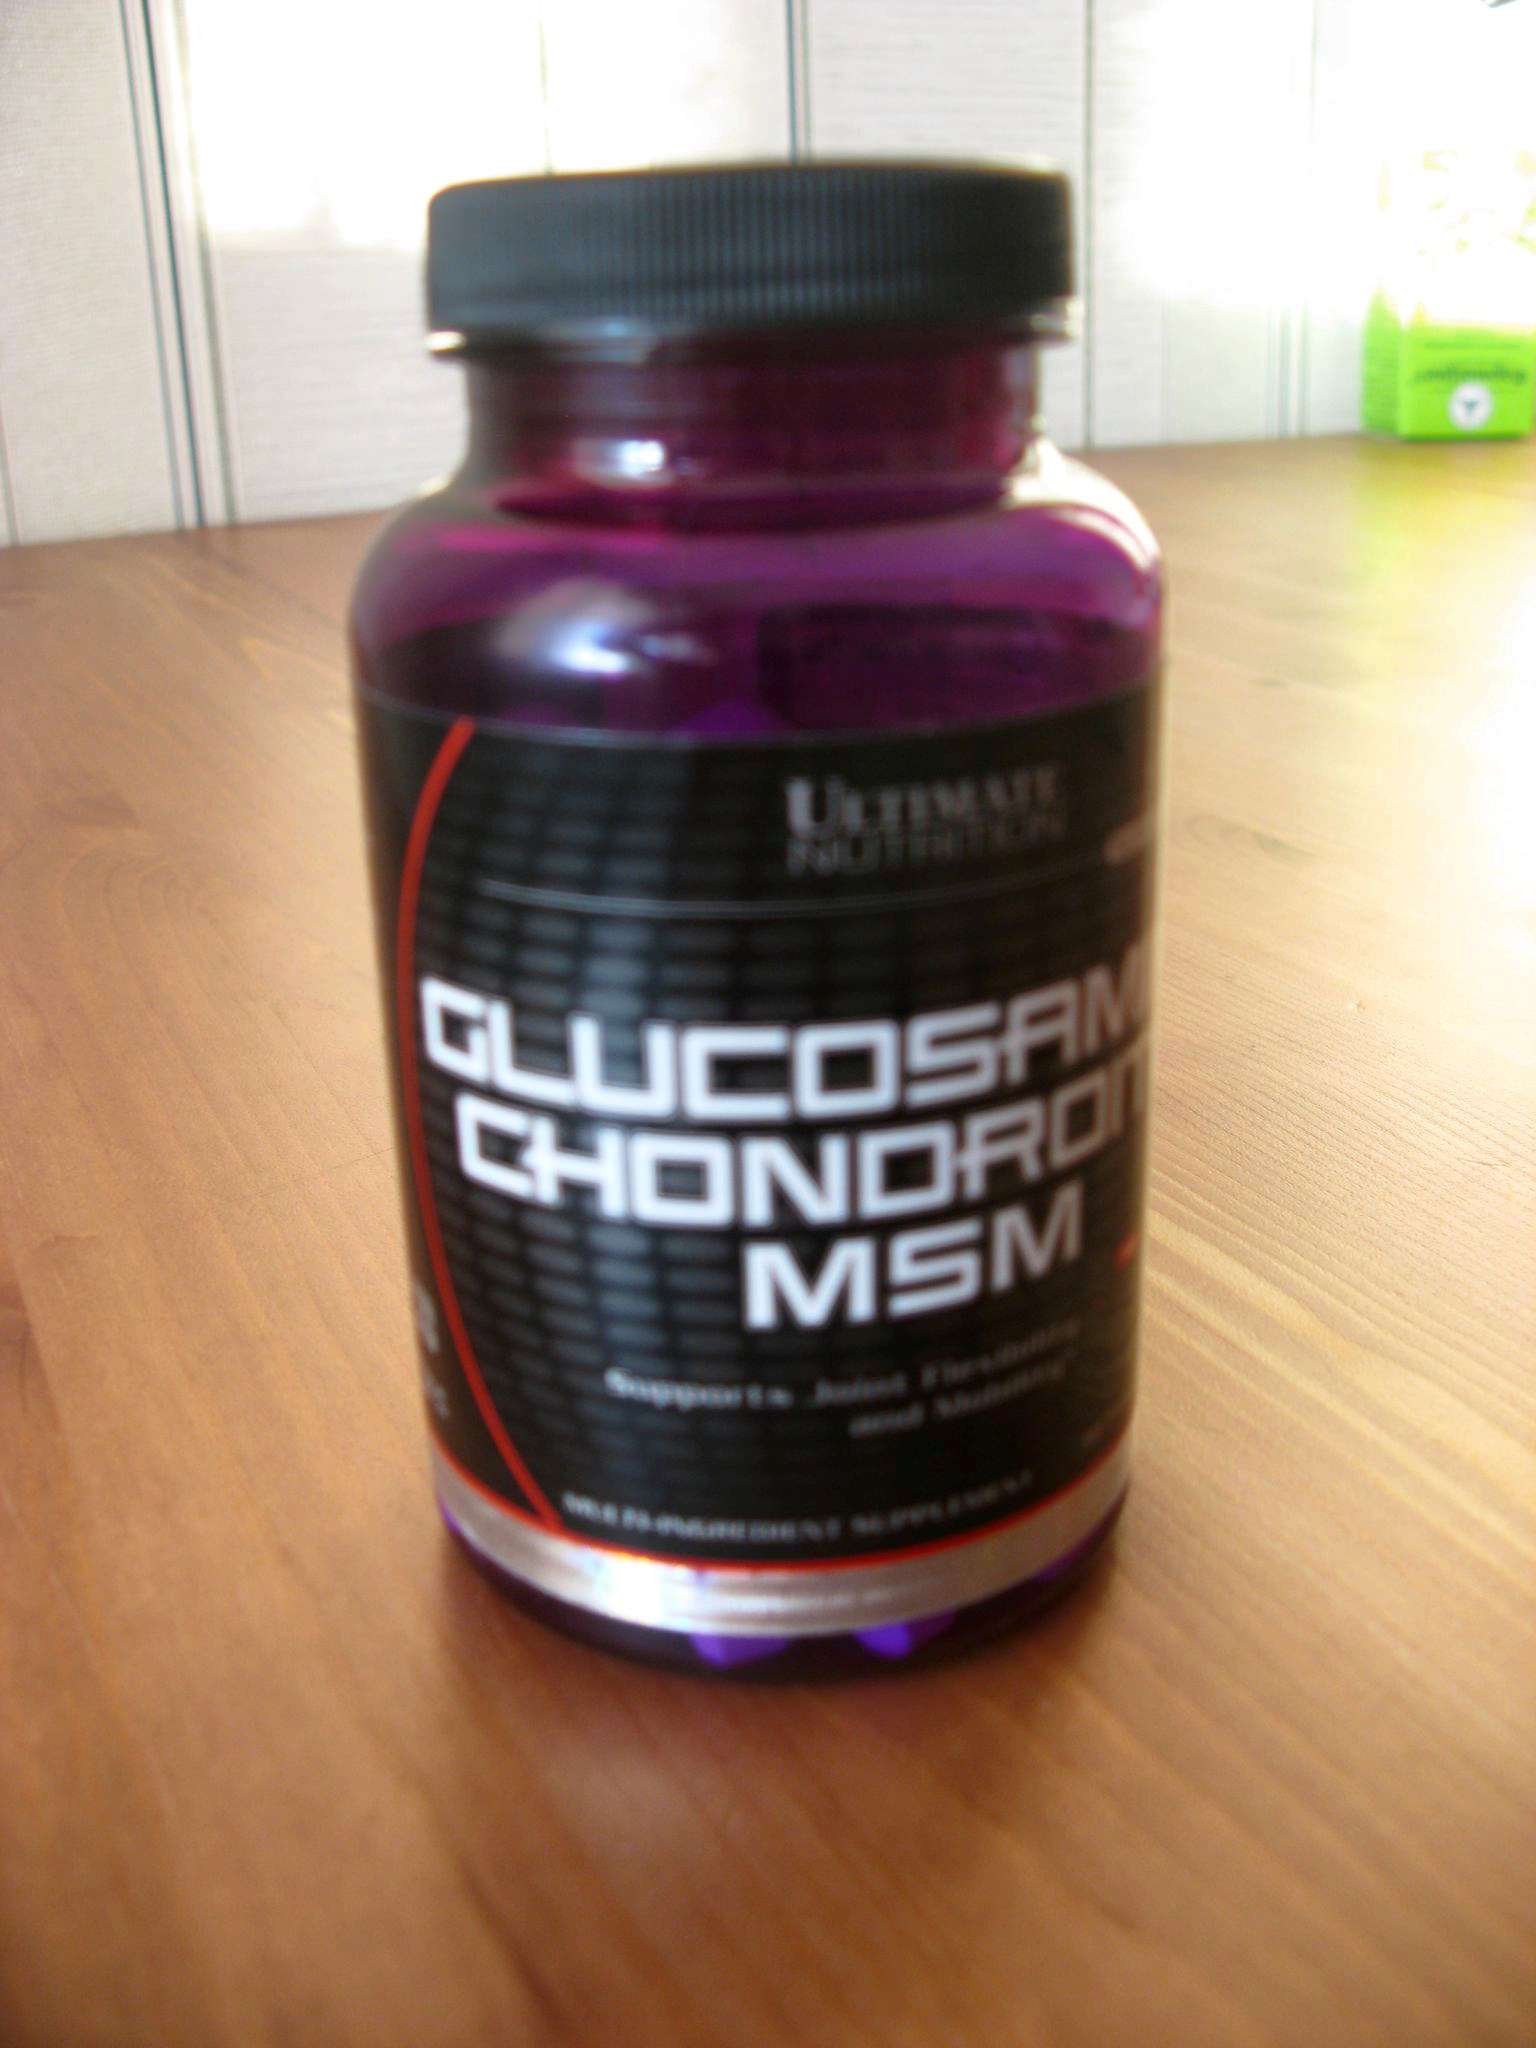 Ultimate nutrition msm. Ultimate Nutrition Glucosamine Chondroitin MSM 90. Ultimate Nutrition Glucosamine Chondroitin. Ultimate Nutrition Glucosamine & Chondroitin + MSM 90таб. Ultimate Nutrition Omega 3 Glucosamine Chondroitin MSM.